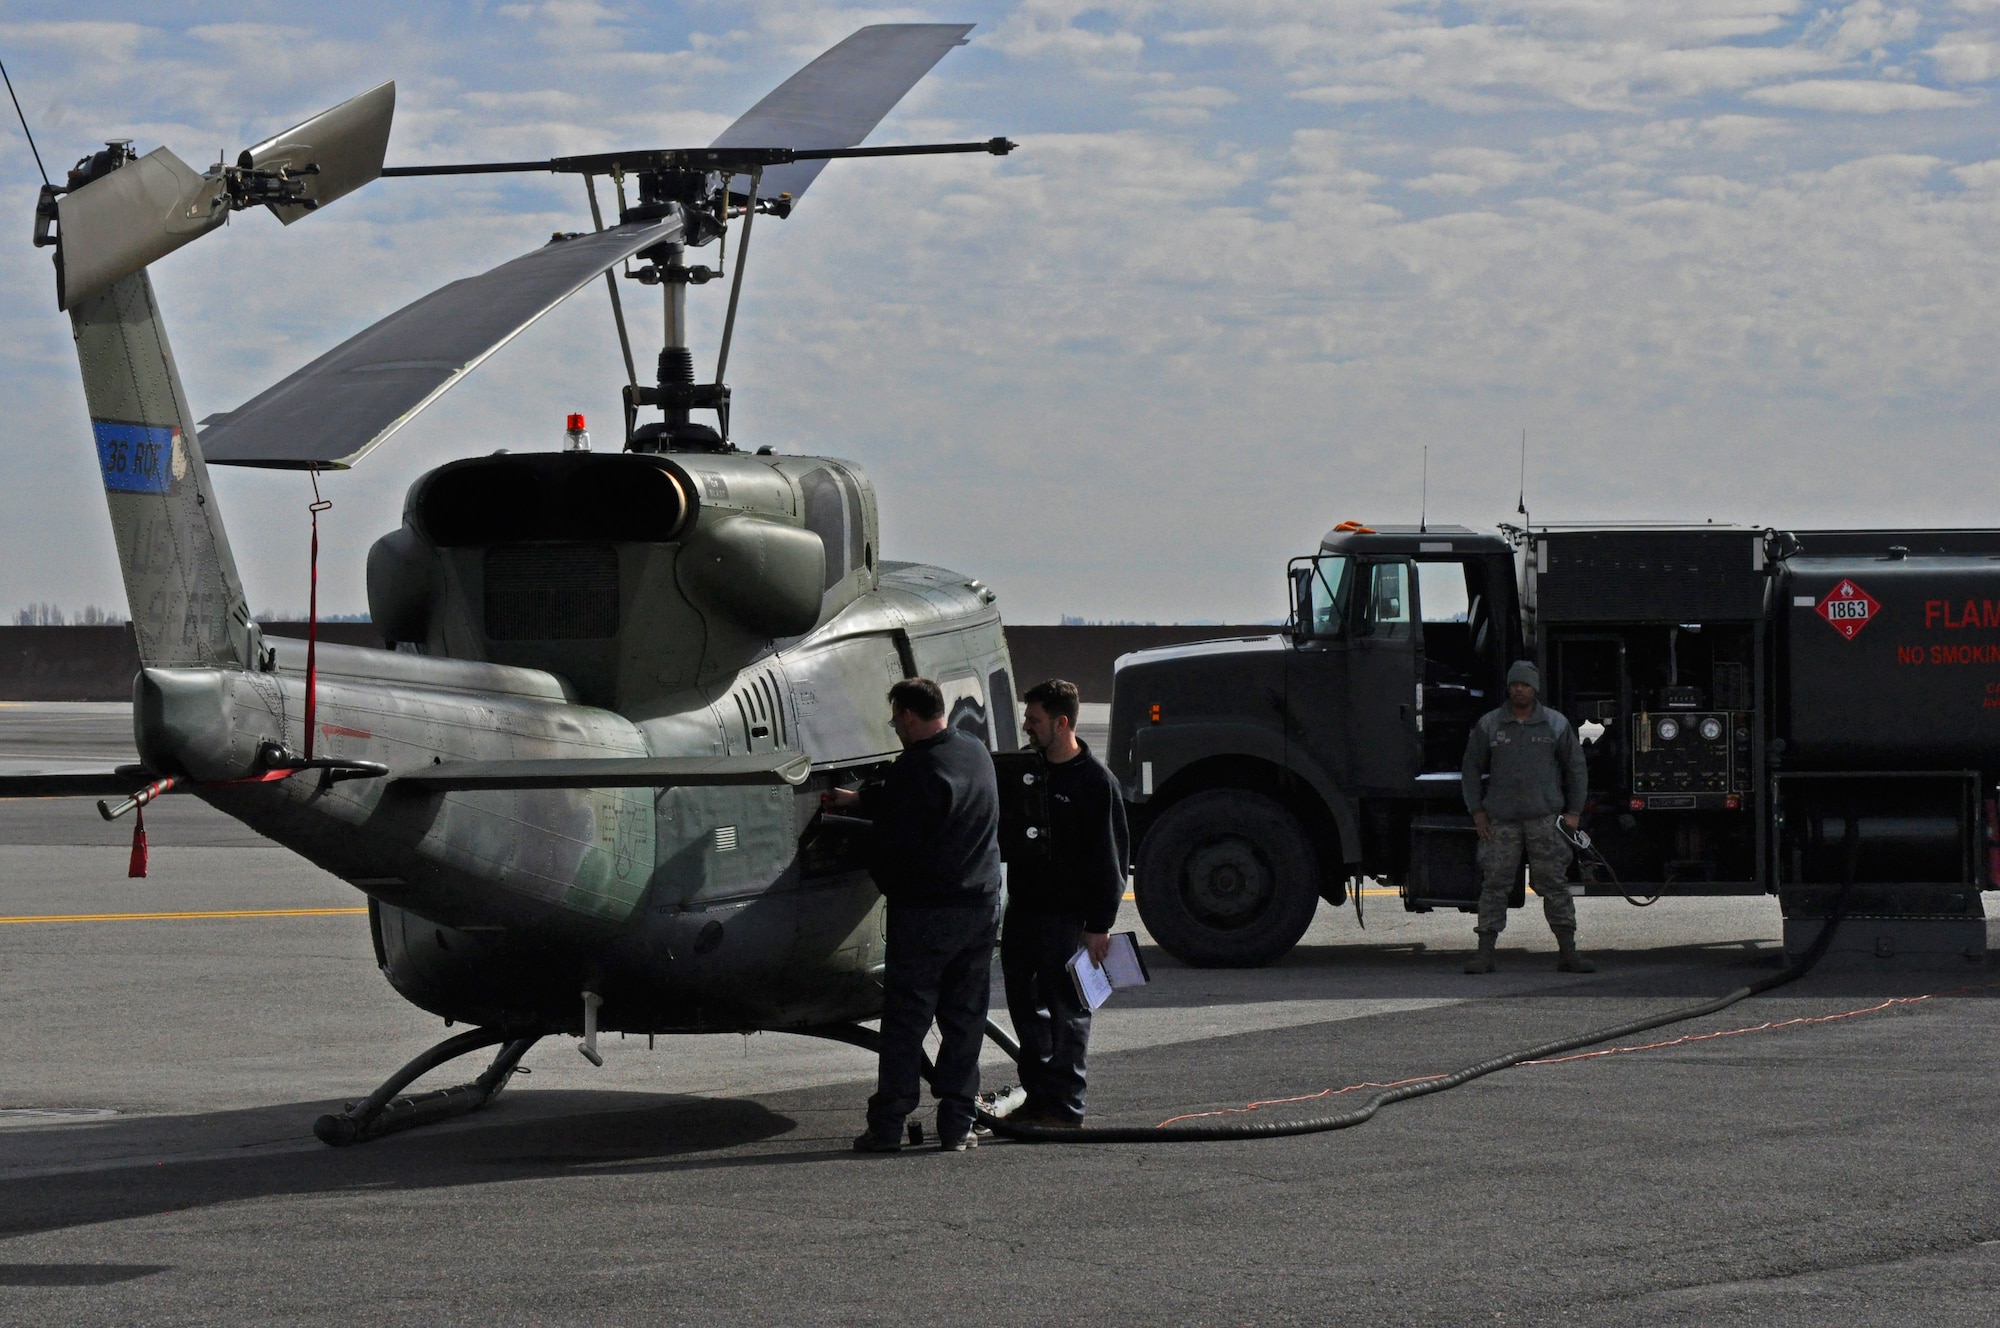 A 36th Rescue Squadron UH-1N Iroquois helicopter receives fuel from an R-11 fuel truck operated by the 92nd Logistics Readiness Squadron petroleum, oil and lubricants flight Feb. 18, 2015, at Fairchild Air Force Base, Wash. The fuel provided by the POL flight powers the 36 RQS aircraft that have aided in the 688 rescues credited to the squadron since its inception in 1971. (U.S. Air Force photo/Capt. David Liapis)